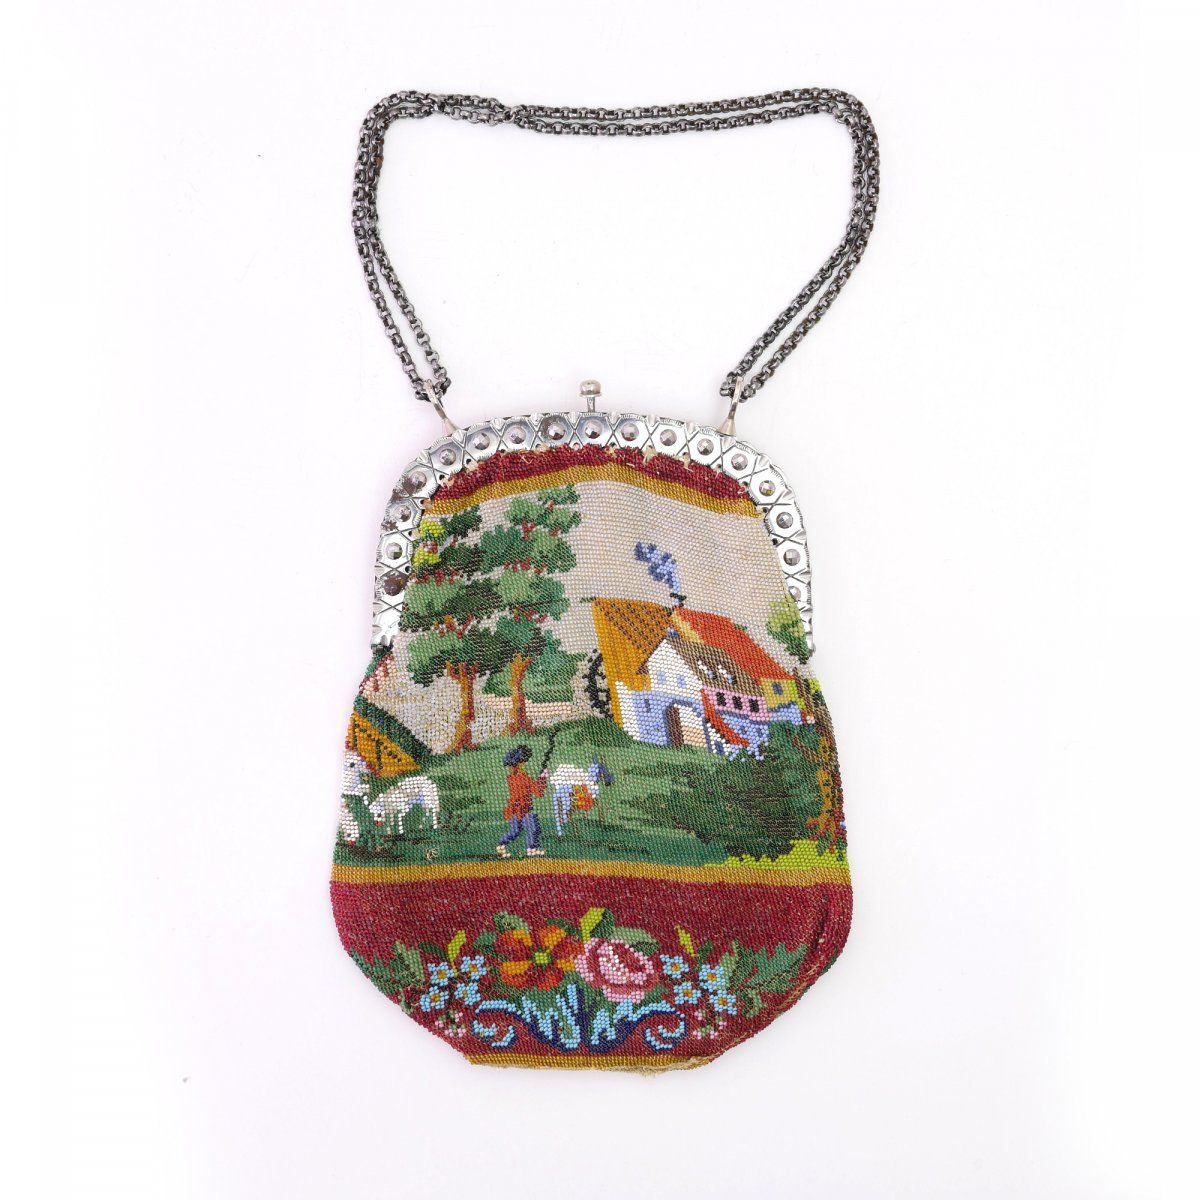 Null Bag with peasant scene, 2nd half of the 19th century, H. 19.5 x 15 cm. Knit&hellip;